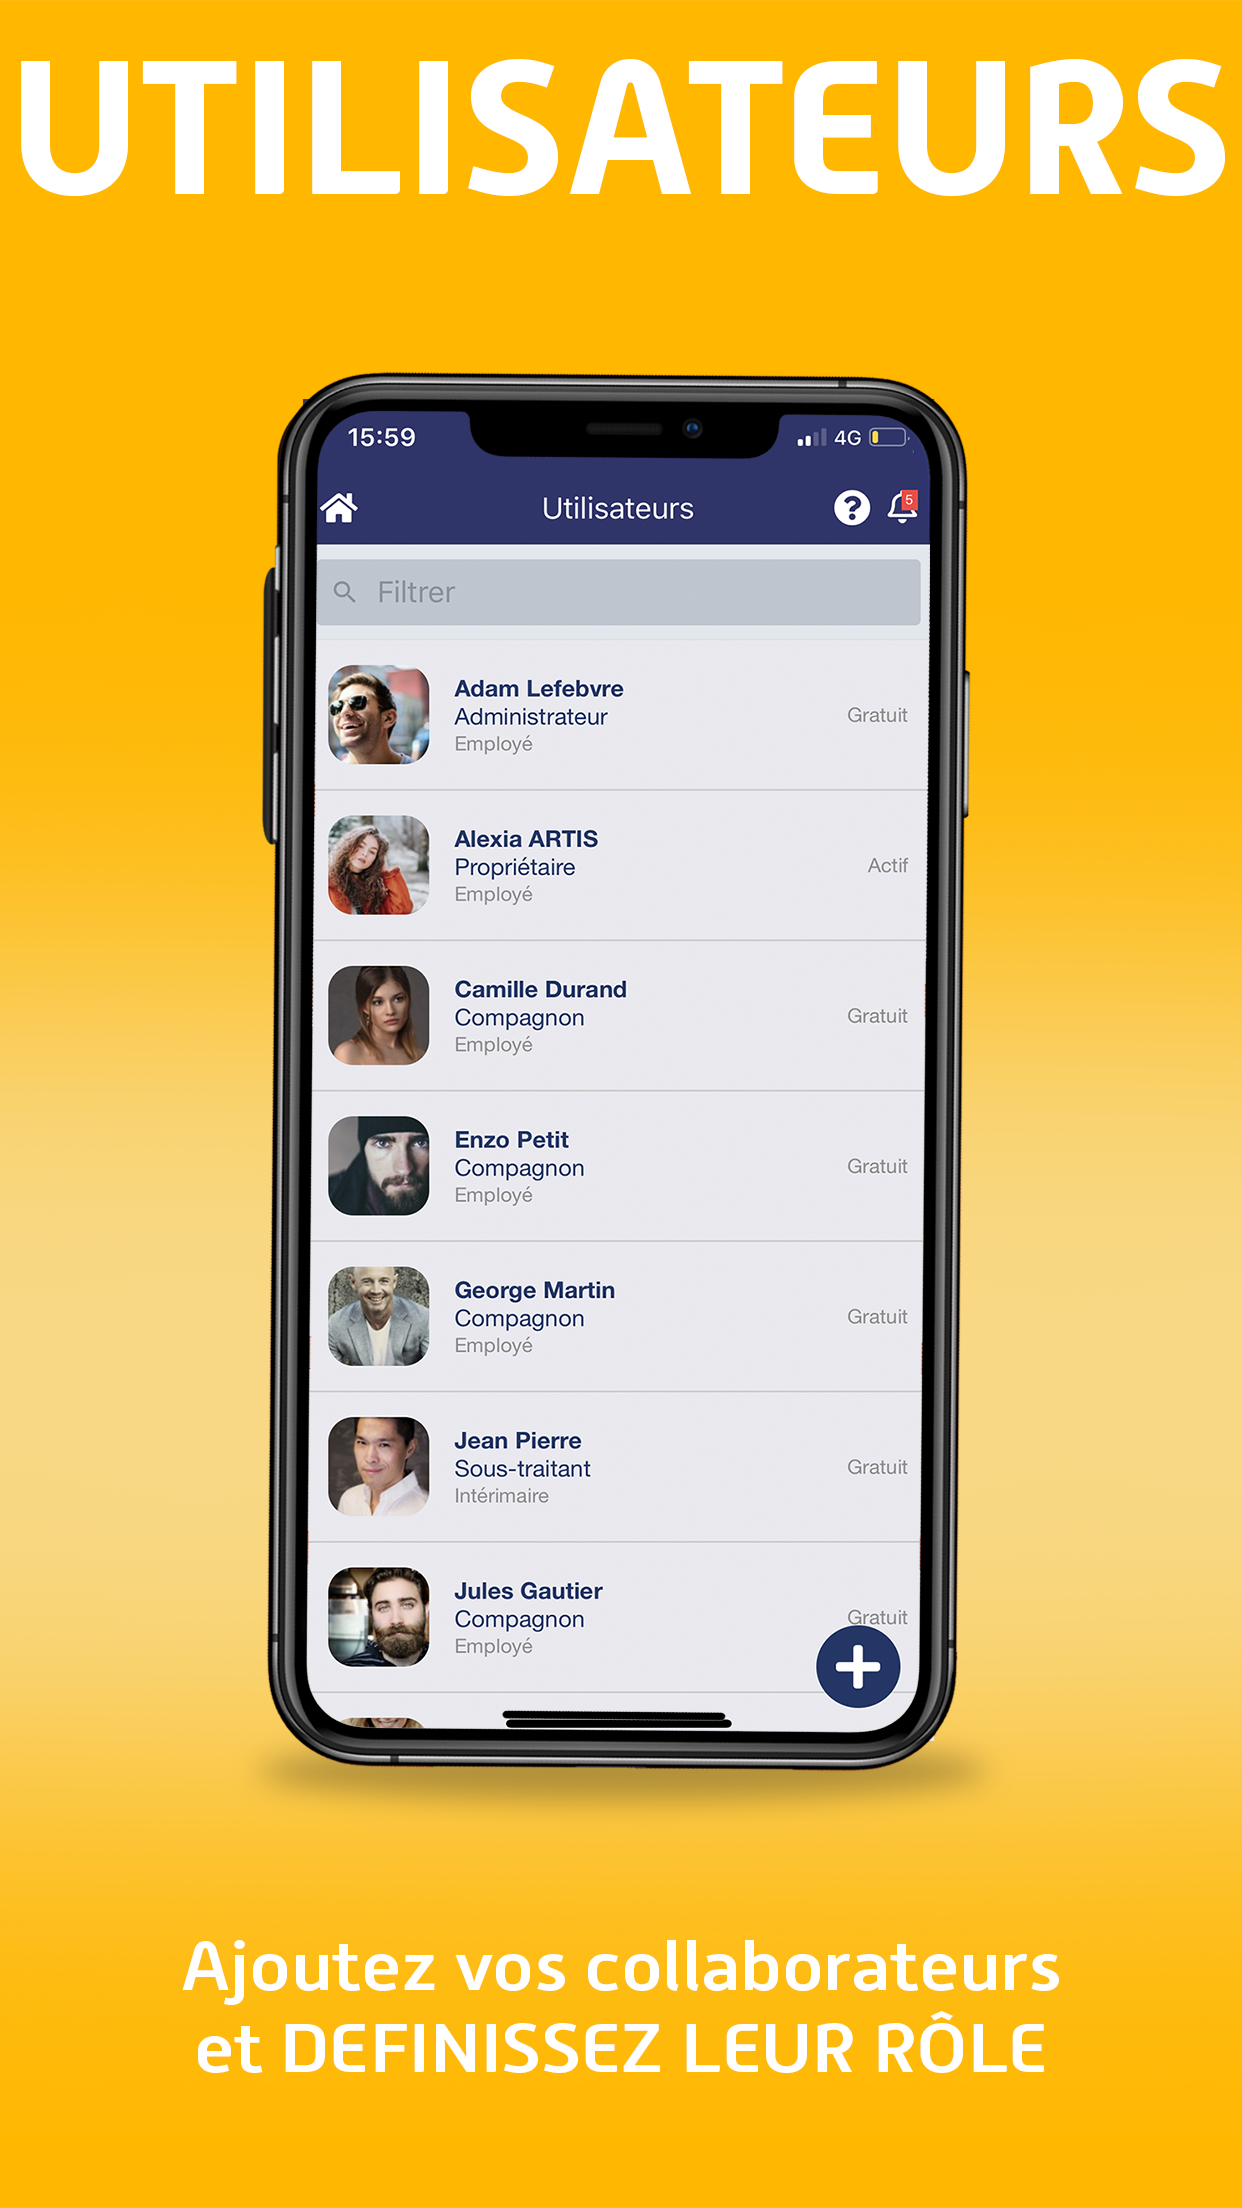 Alobees Software - Add unlimited collaborators to your company, activate and revoke them easily. Discuss in real time with your collaborators.